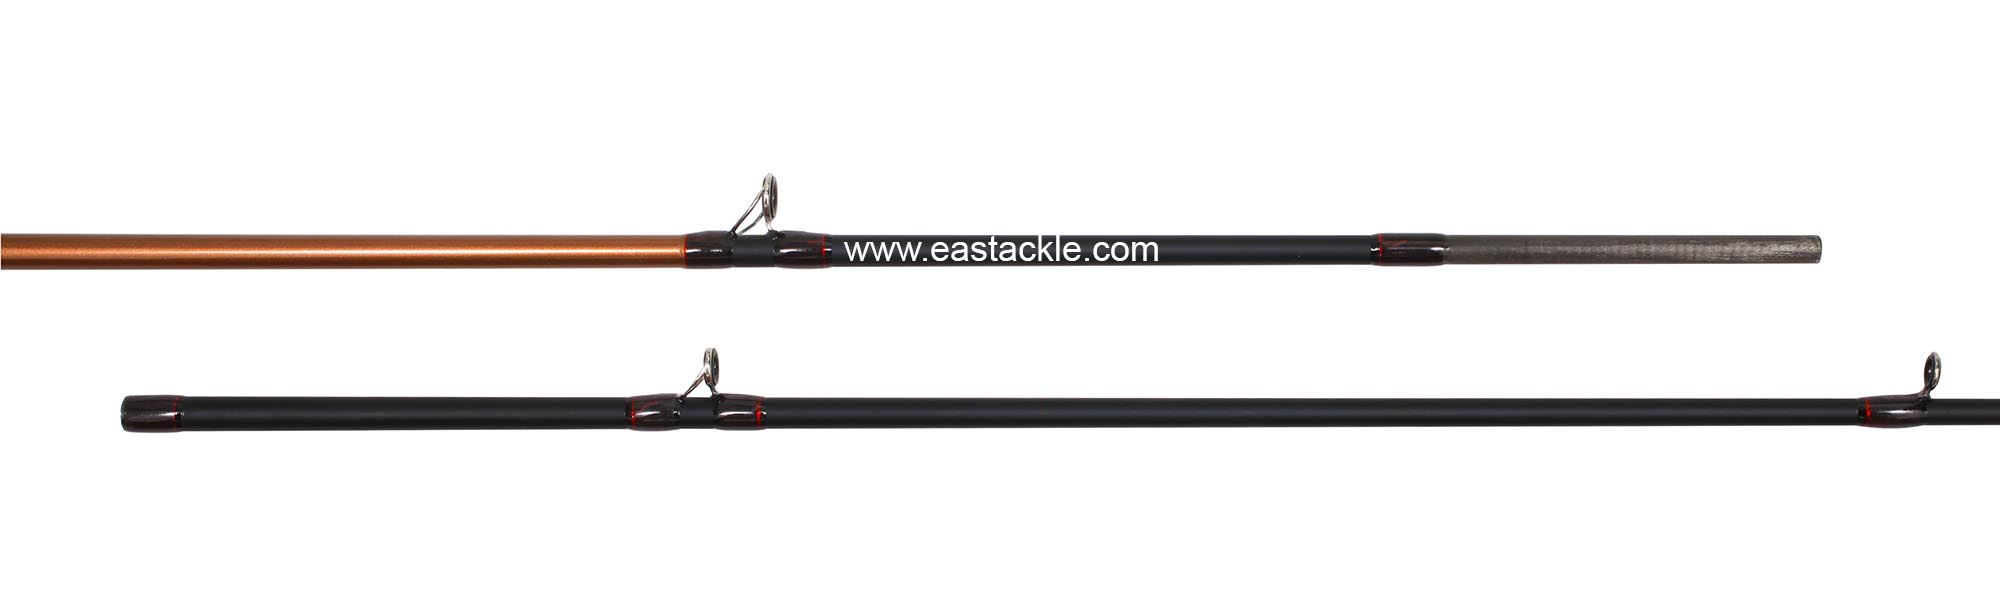 Storm - Teenie - TNC642UL - Bait Casting Rod - Joint Section (Side View) | Eastackle